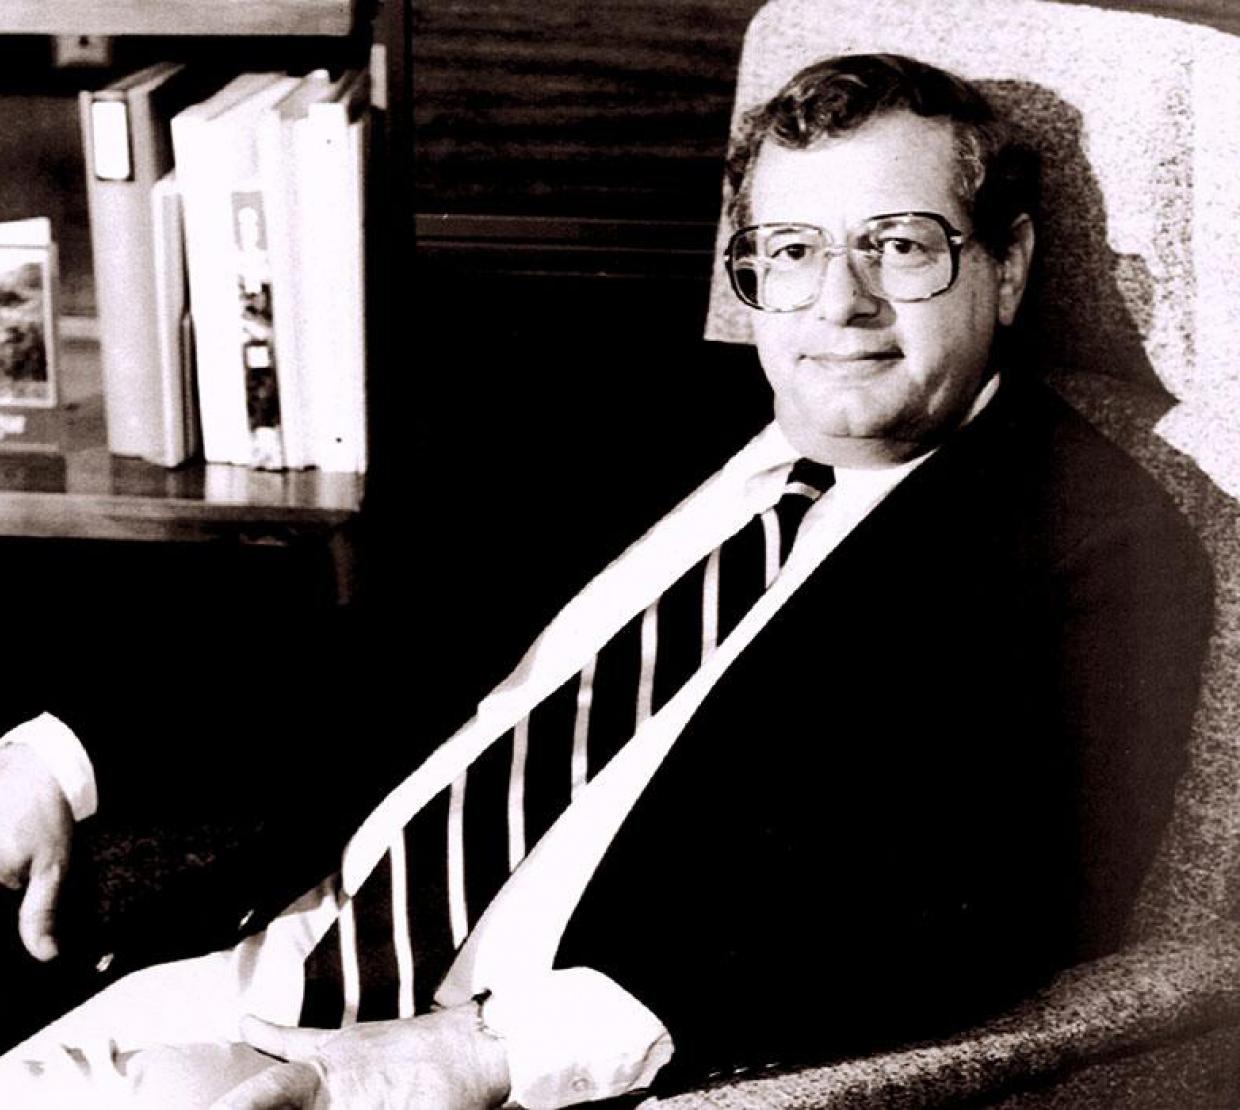 Dean Fred Horne in the Dean's Office